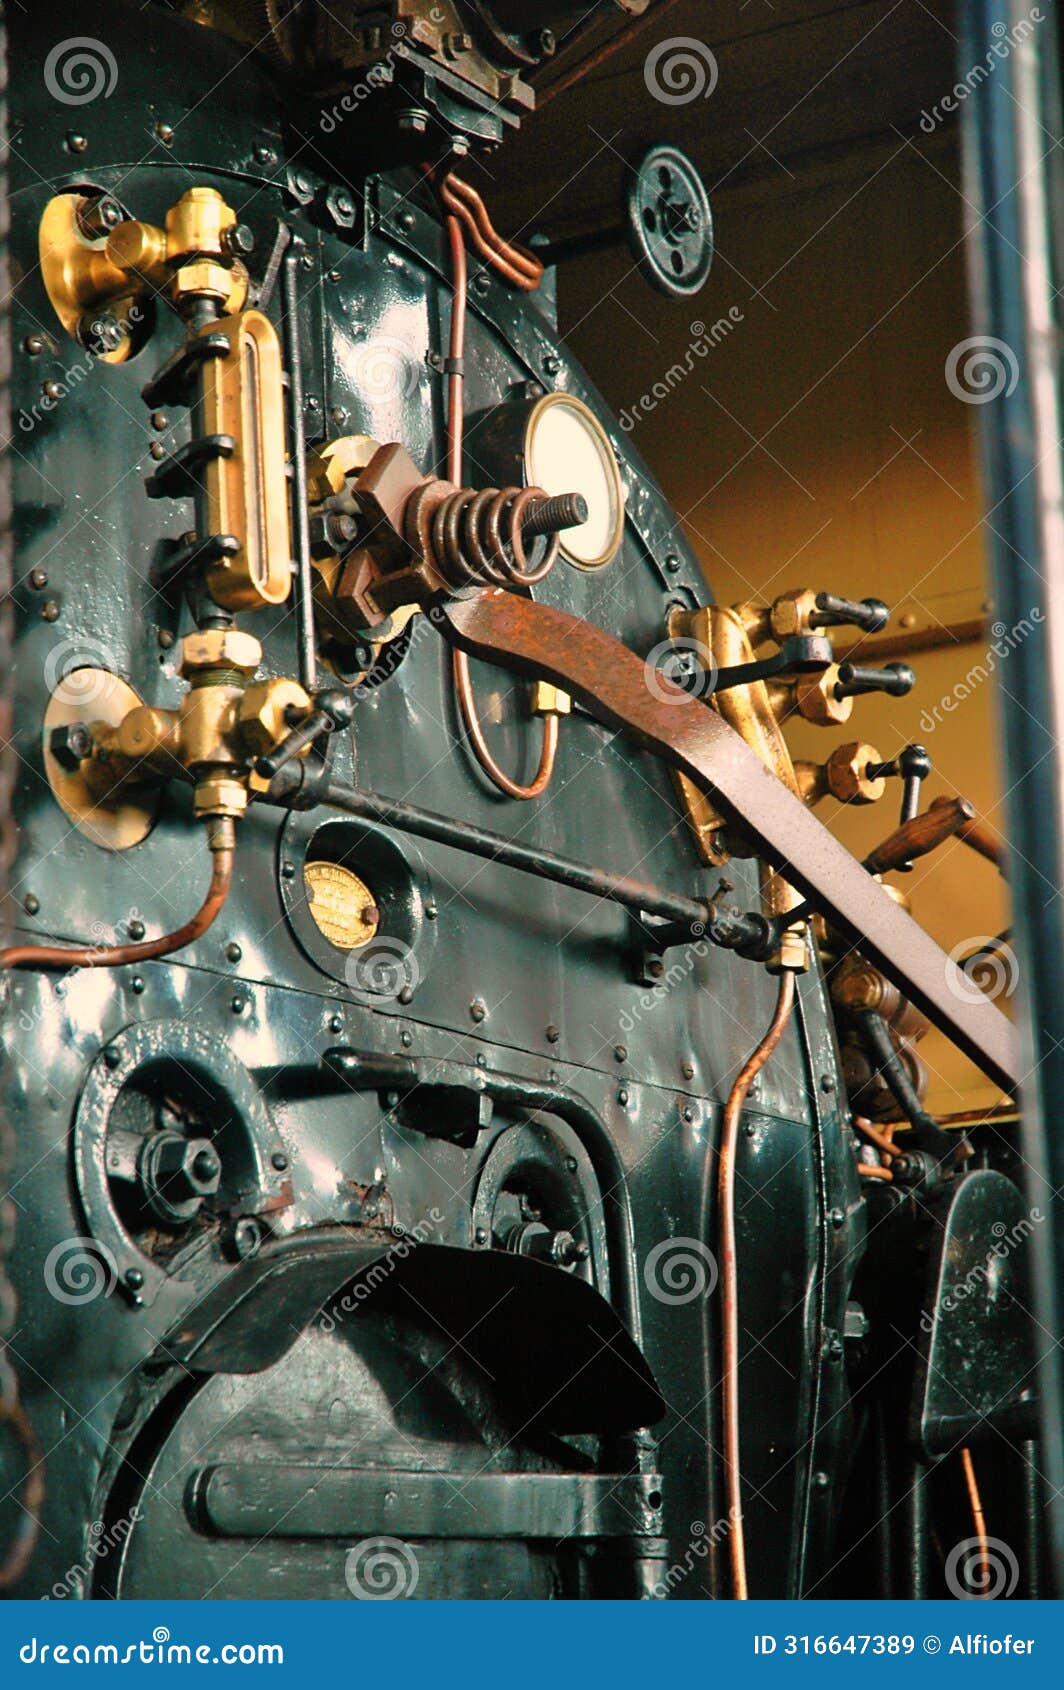 instruments control panel in a steam train locomotive